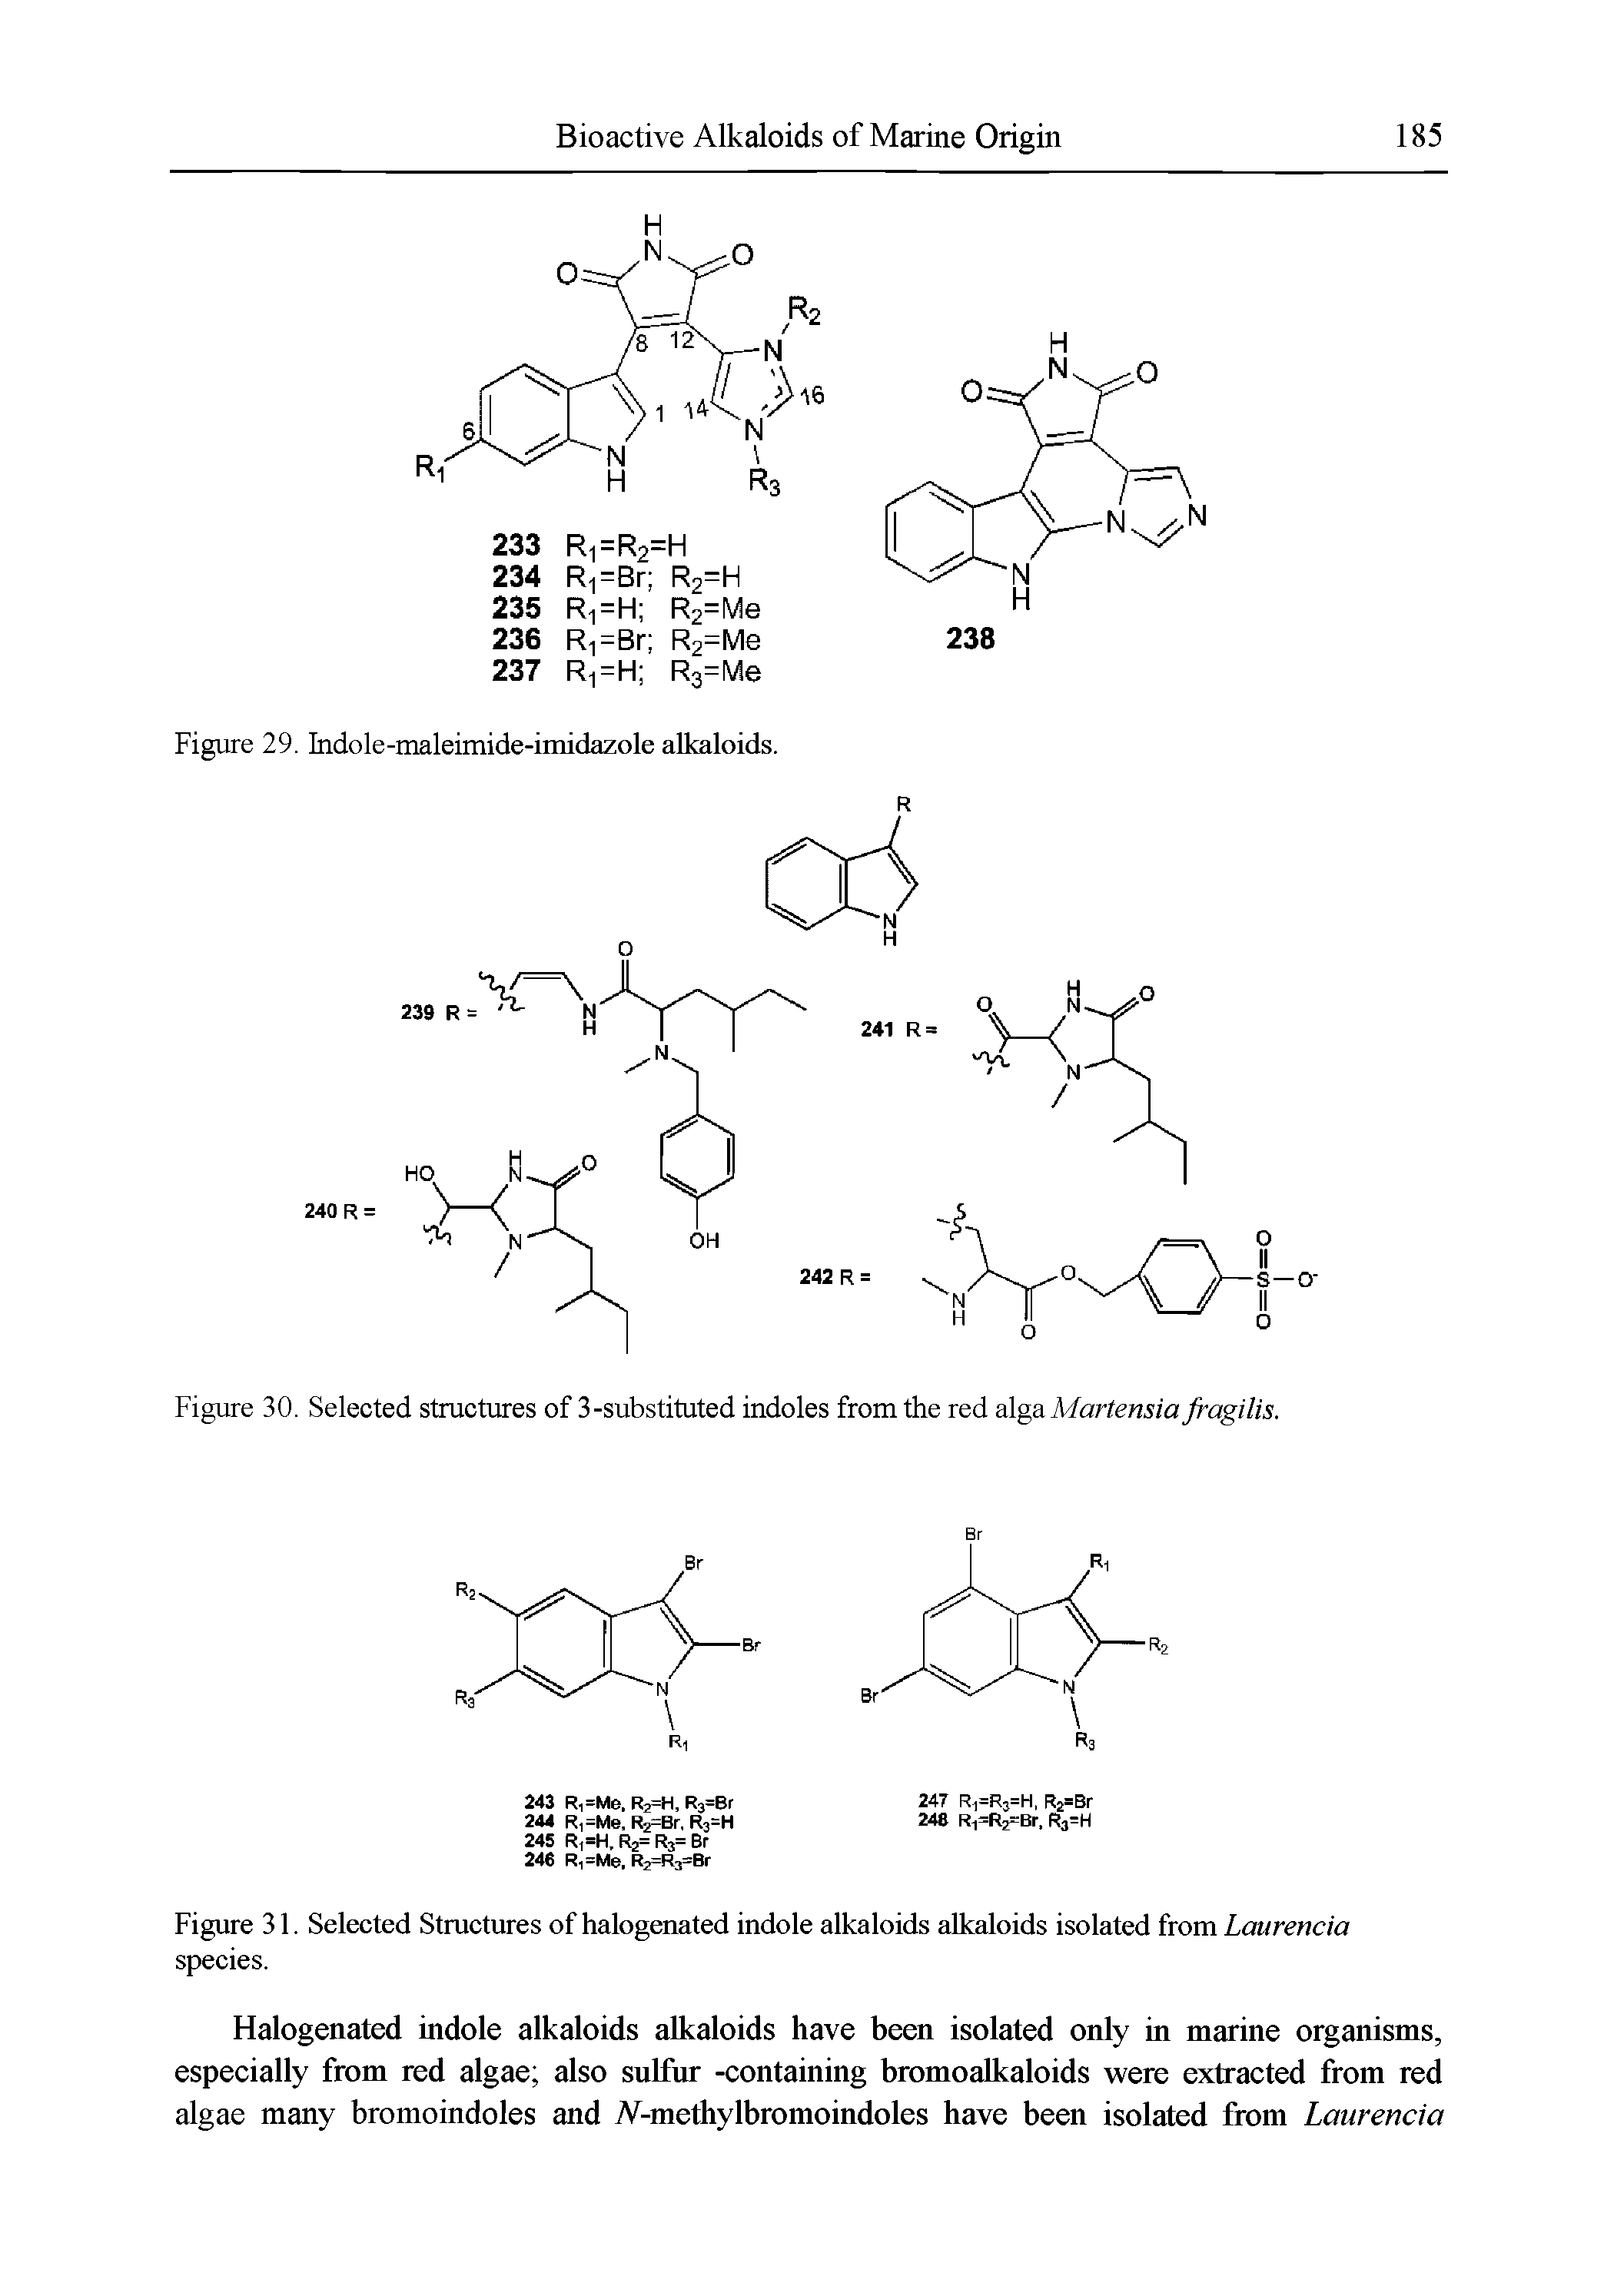 Figure 31. Selected Structures of halogenated indole alkaloids alkaloids isolated from Laurencia species.